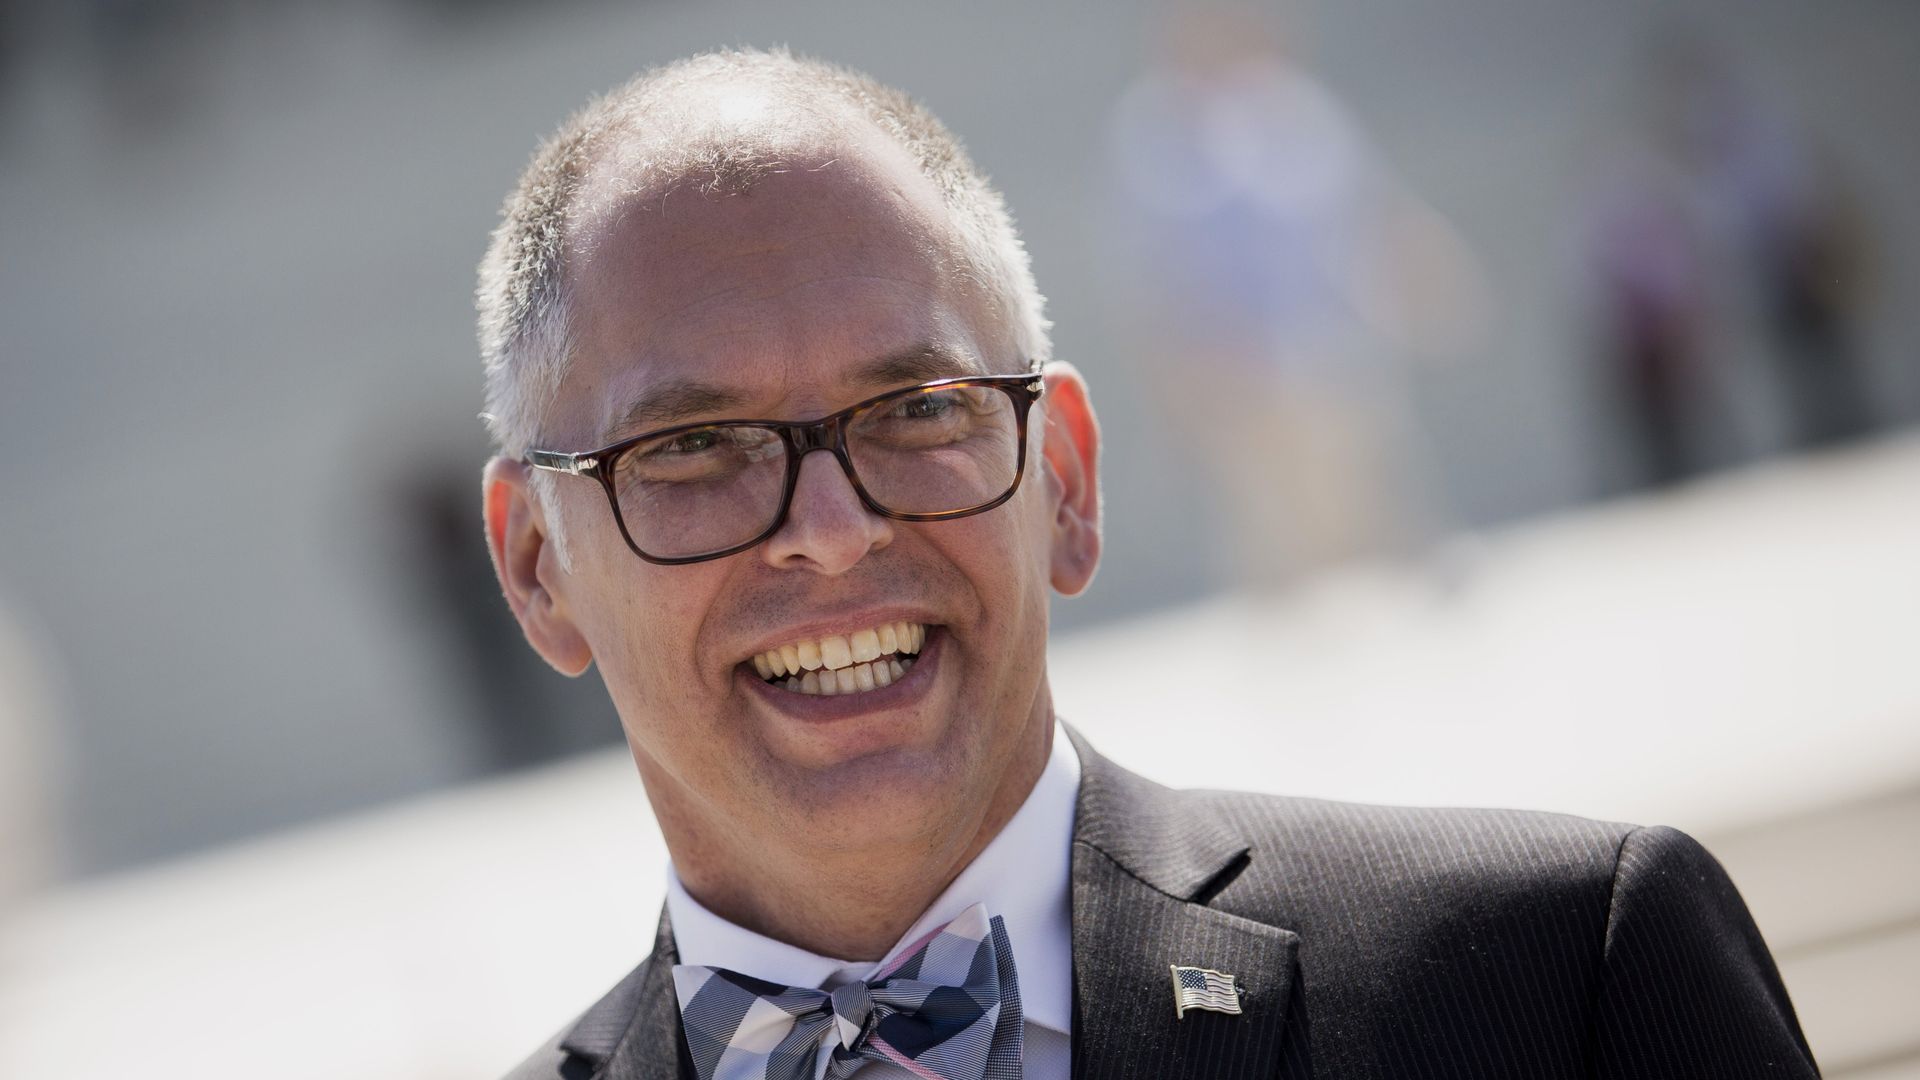 James "Jim" Obergefell, named plaintiff in the Obergefell v. Hodges case, exits the U.S. Supreme Court in Washington, D.C., U.S., on Monday, June 22, 2015.